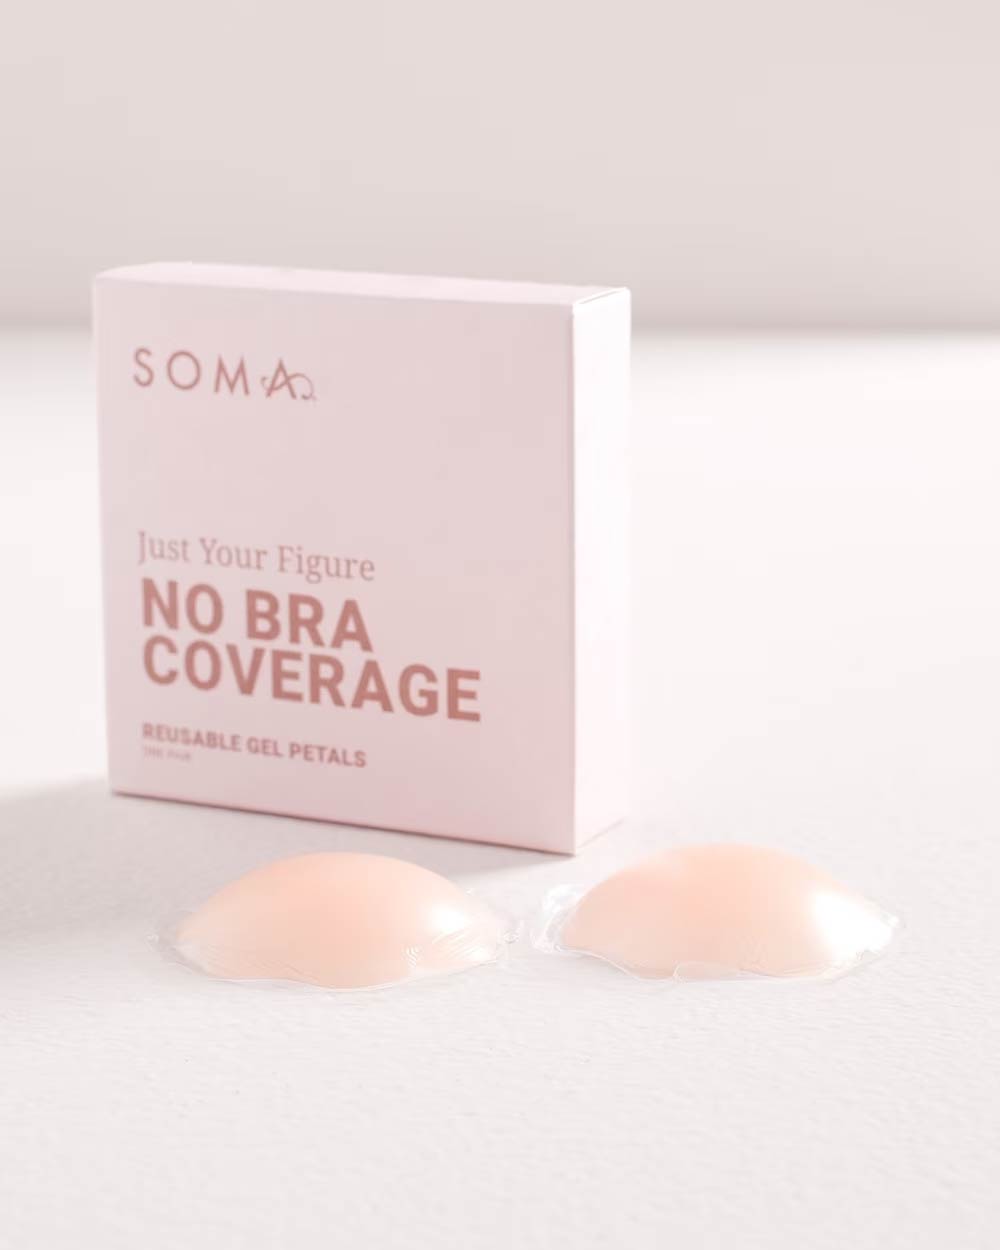 Soma<sup class=st-superscript>®</sup> women’s reusable gel petals laying next to its packaging.